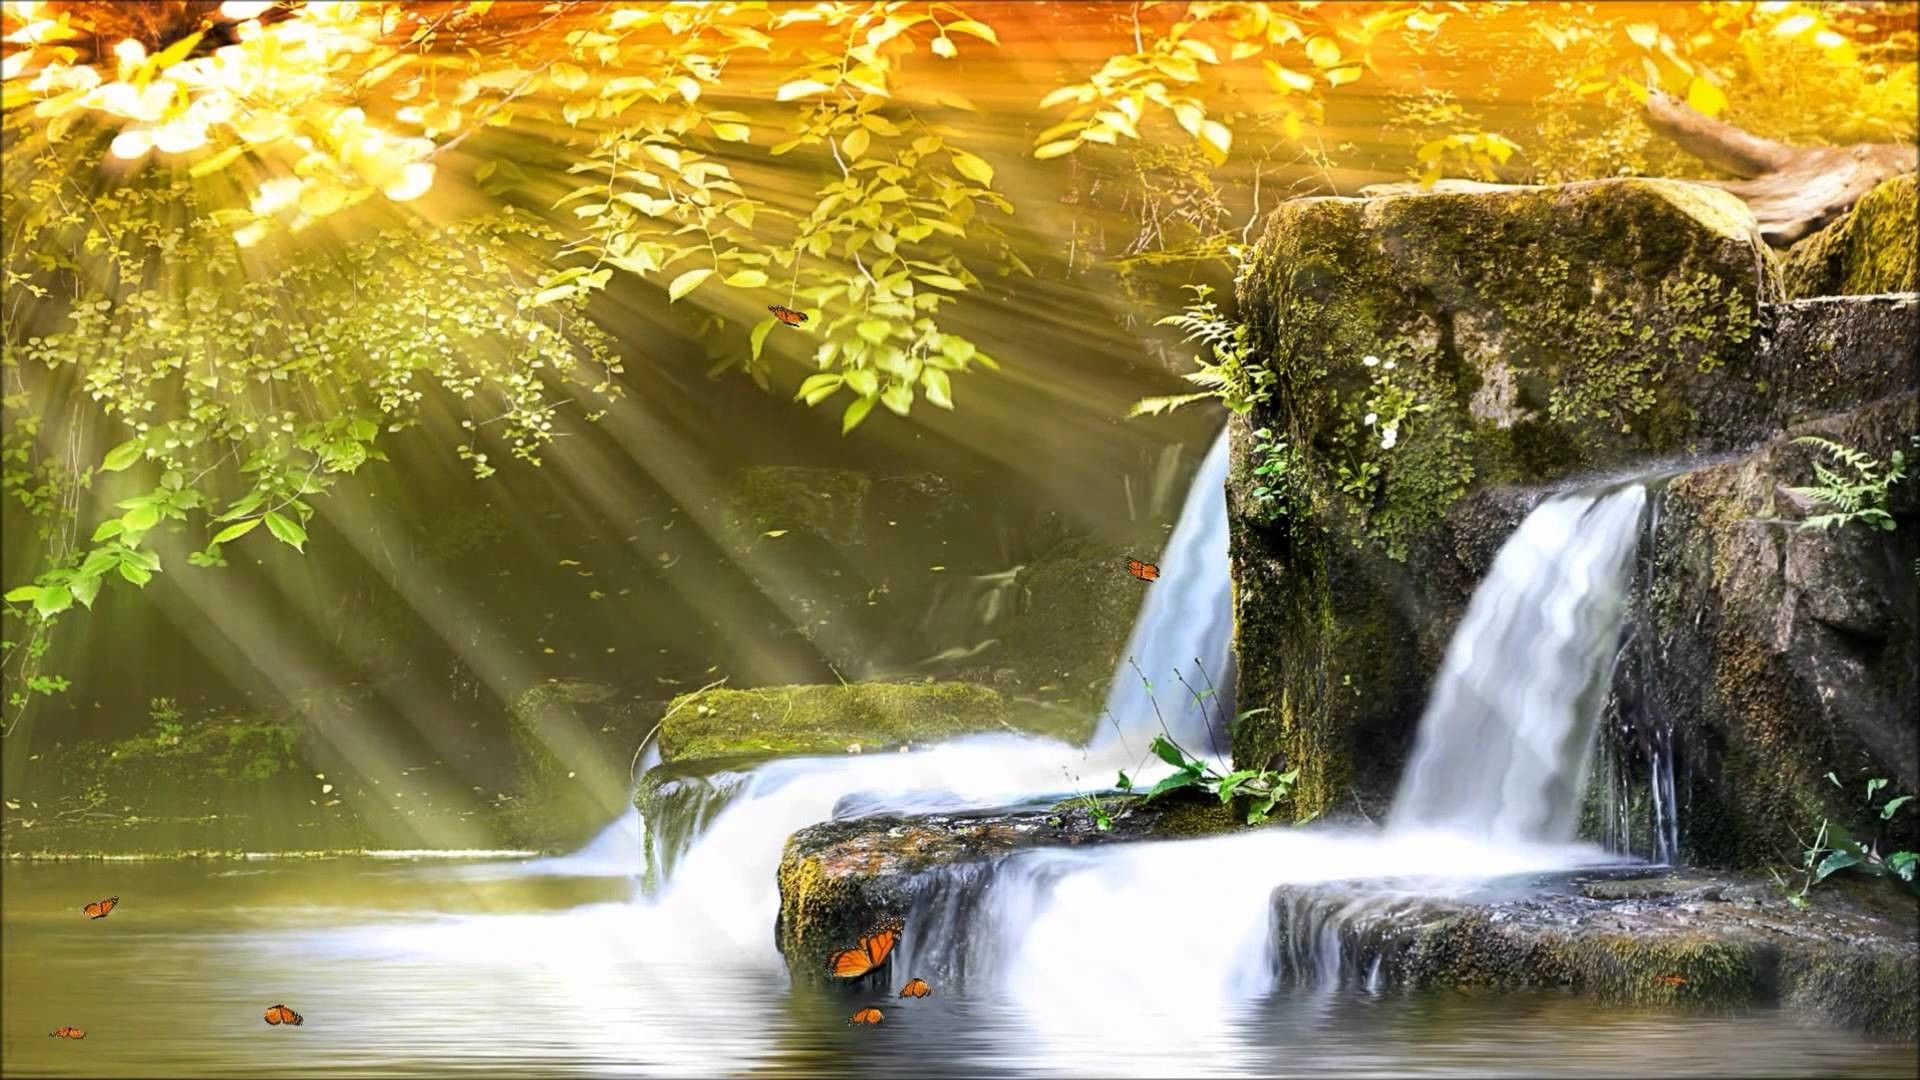 Water Fall Live Wallpapers